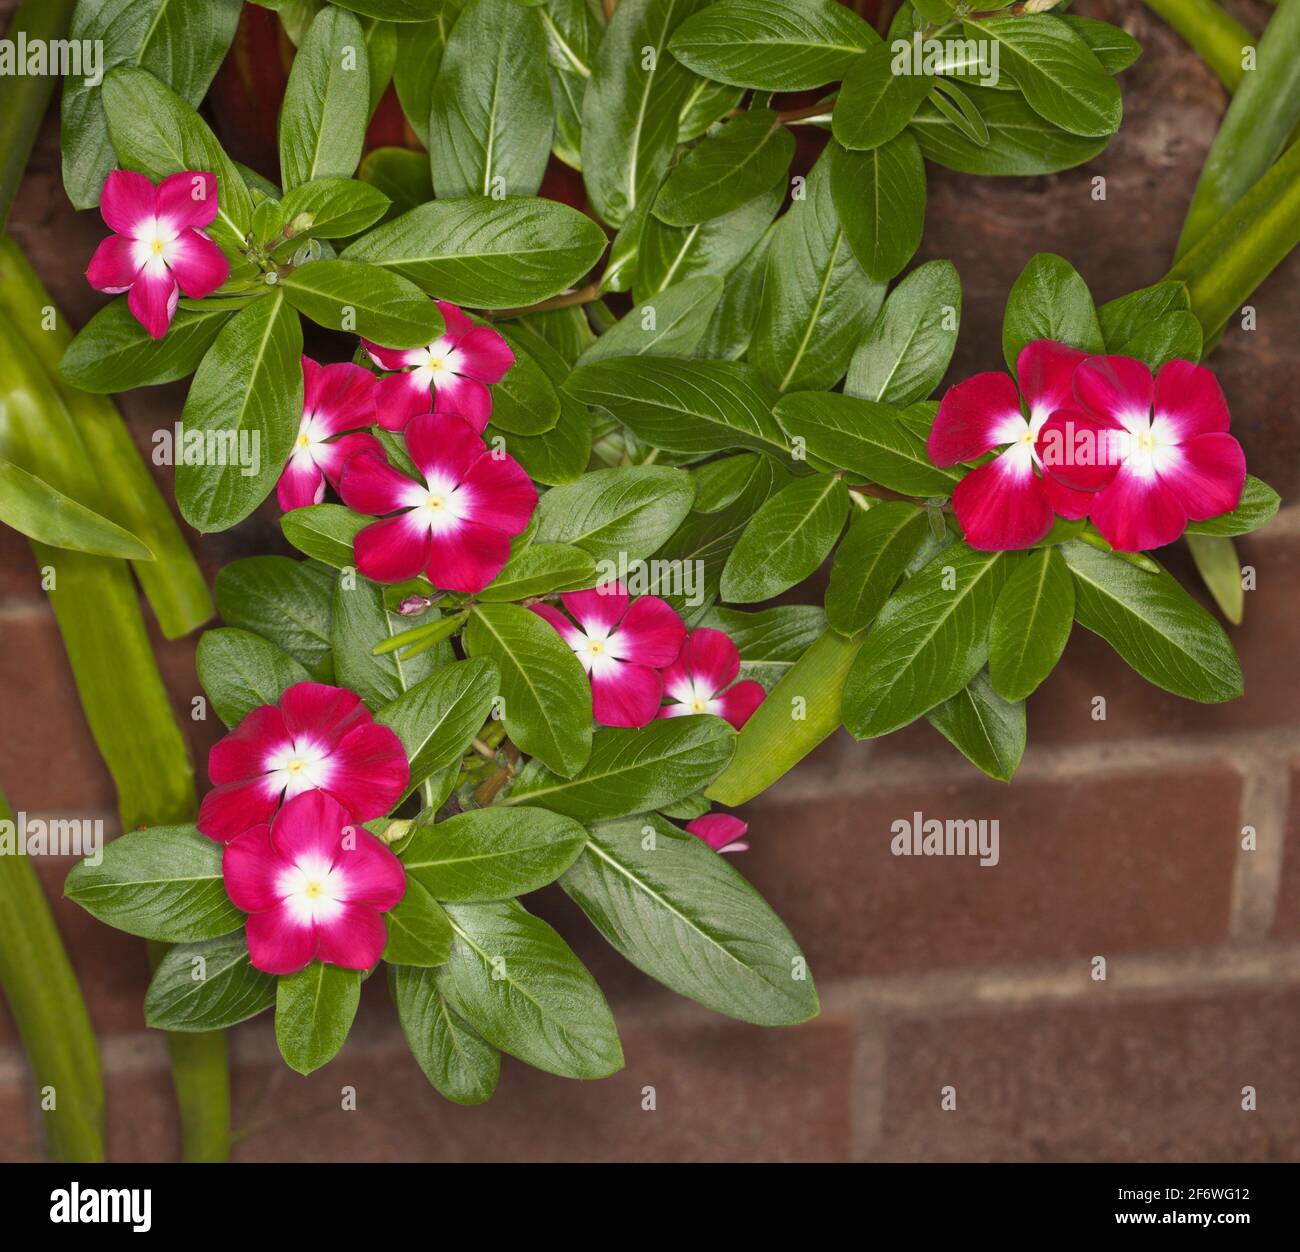 Vivid red flowers with whitecentres of Catharanthus roseus, Vinca, a drought tolerant perennial garden plant, on a background of emerald green foliage Stock Photo